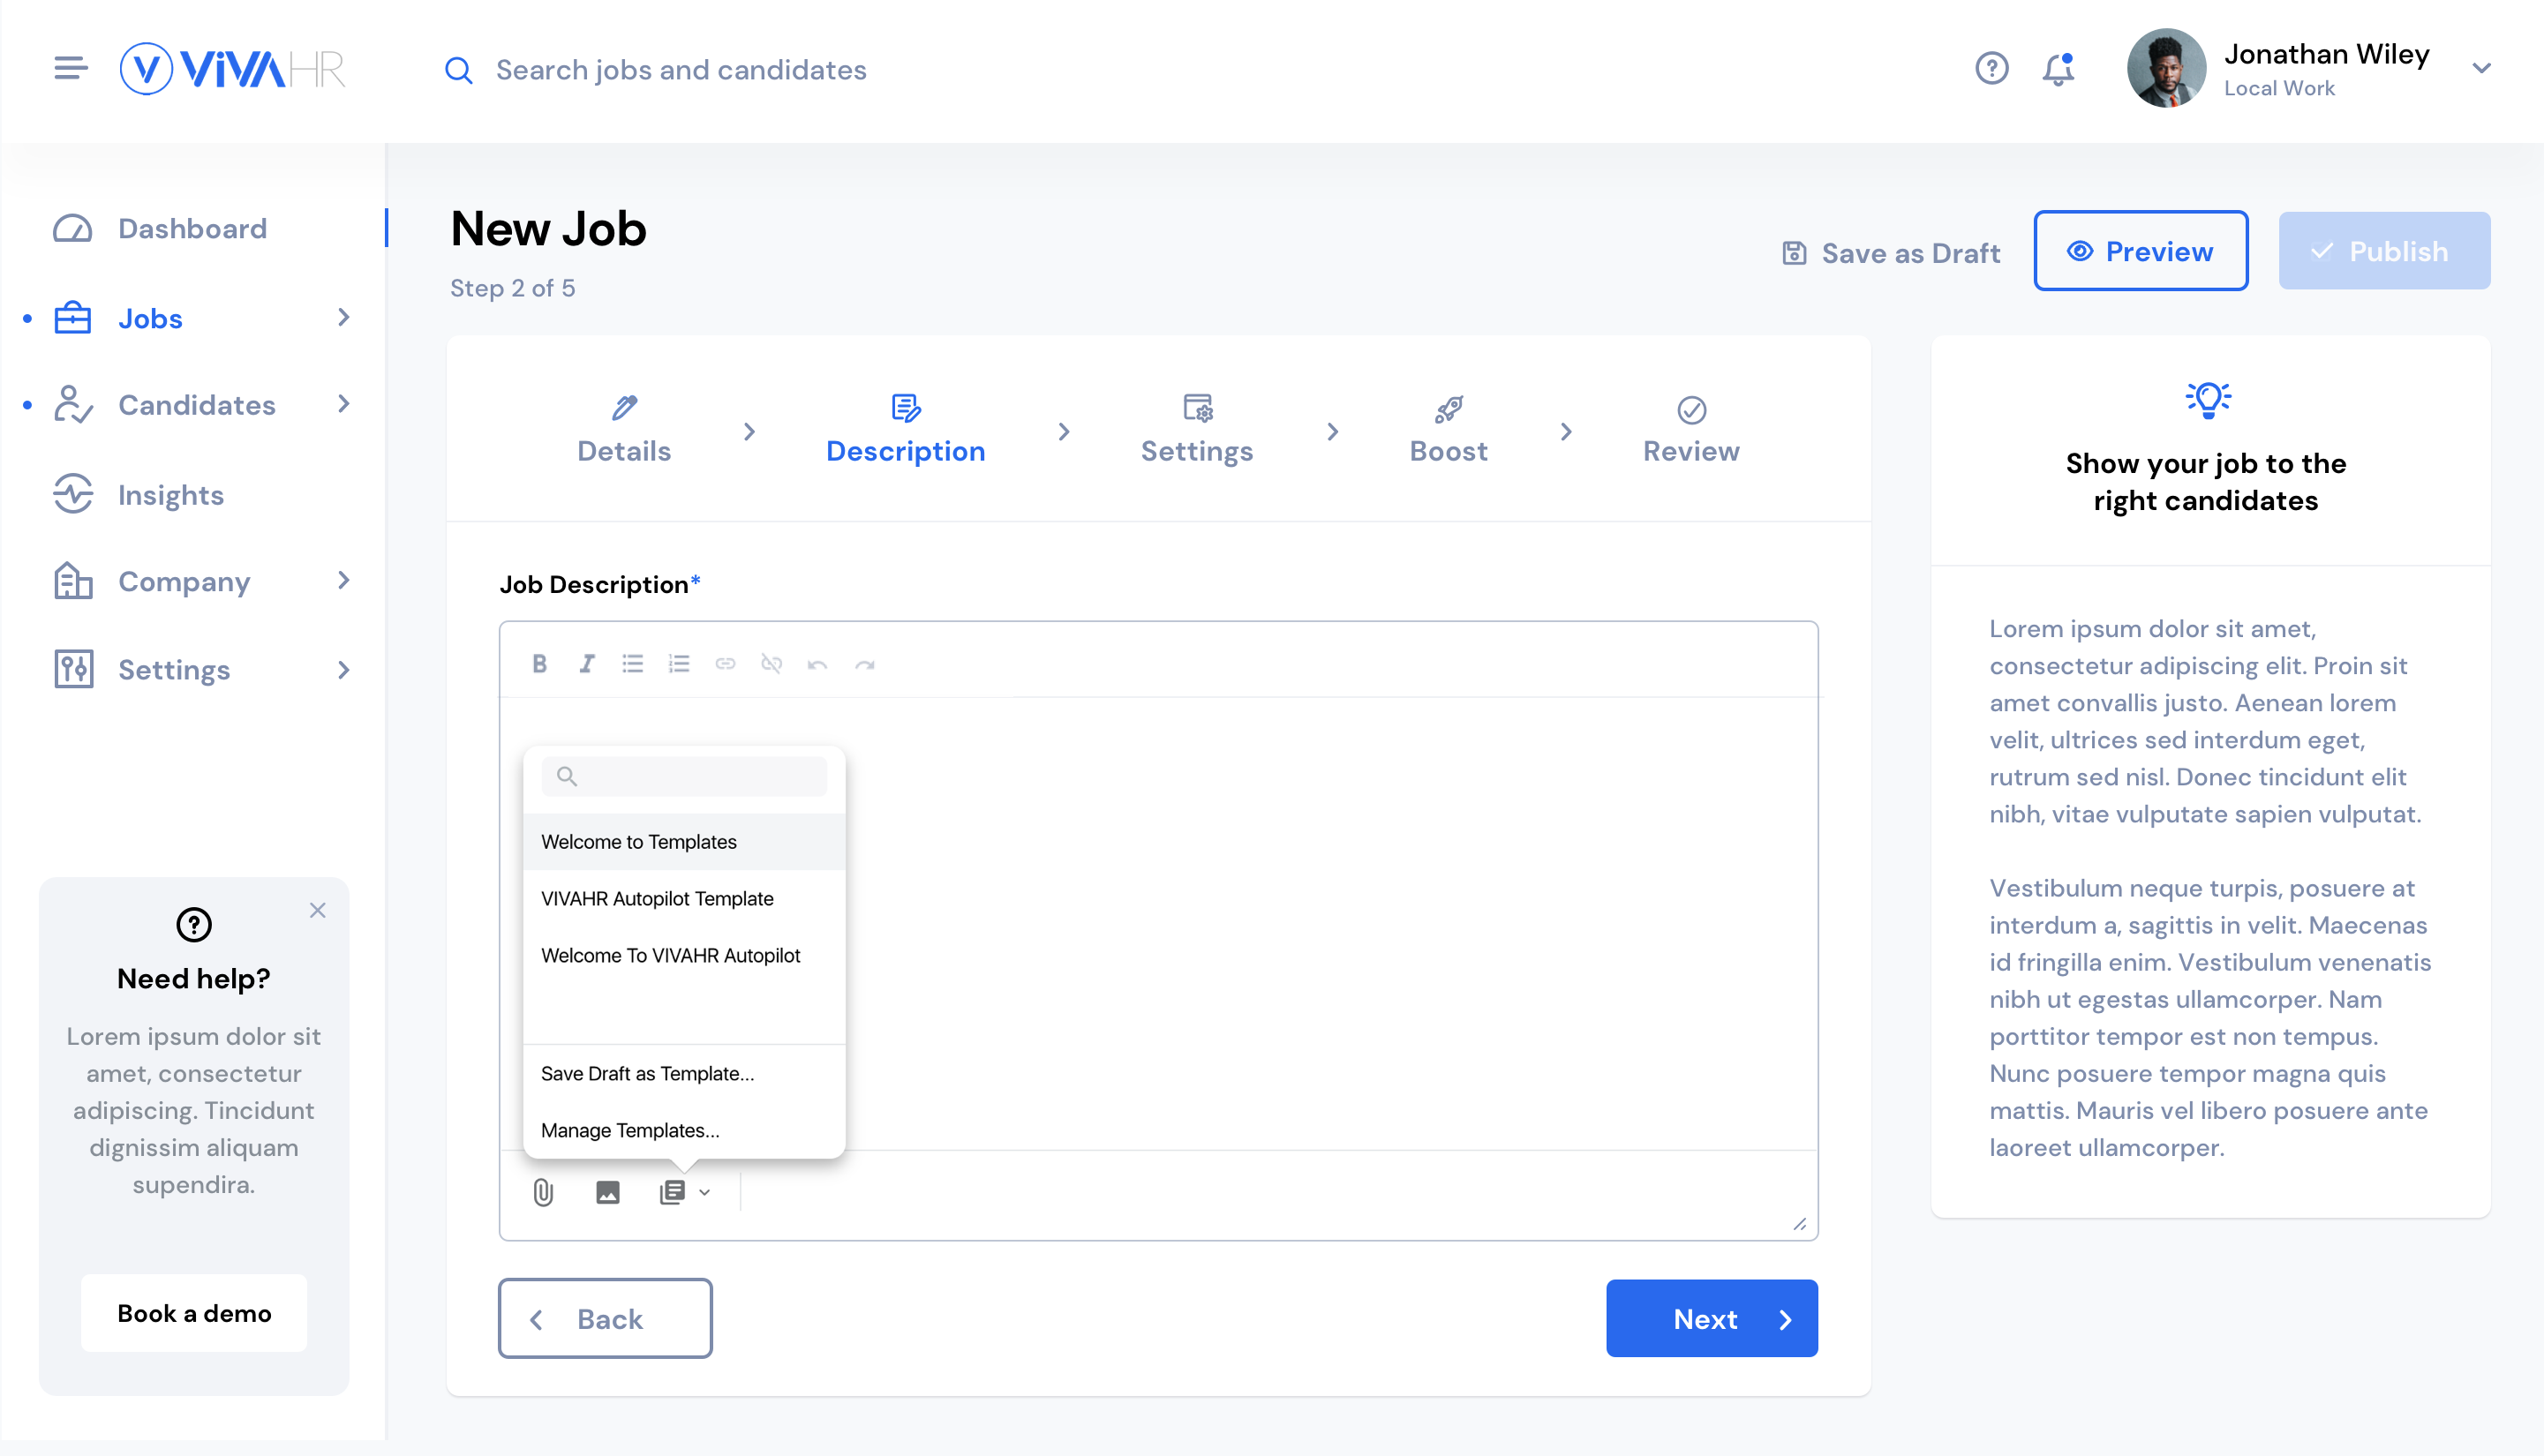 Build a personalized job description to be shared to 50+ job boards with one-click.